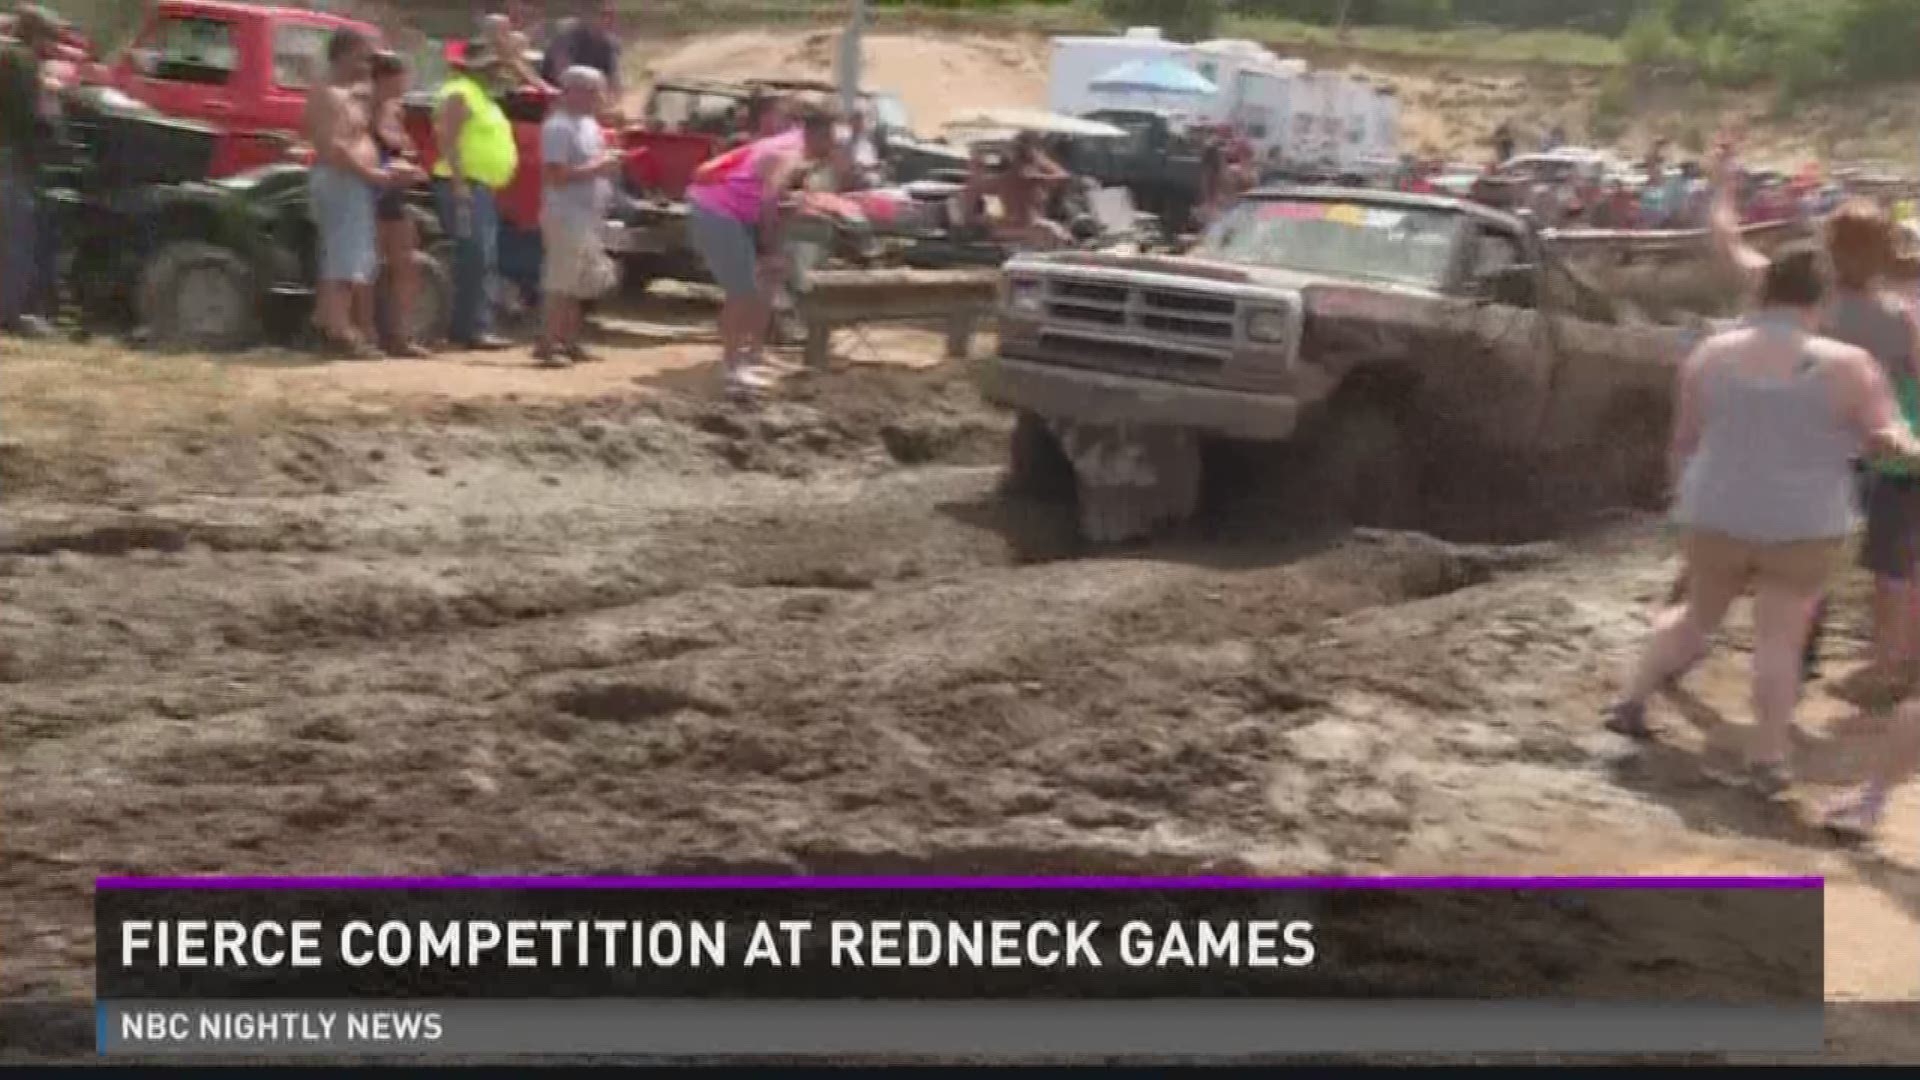 Fierce competition at Redneck Games